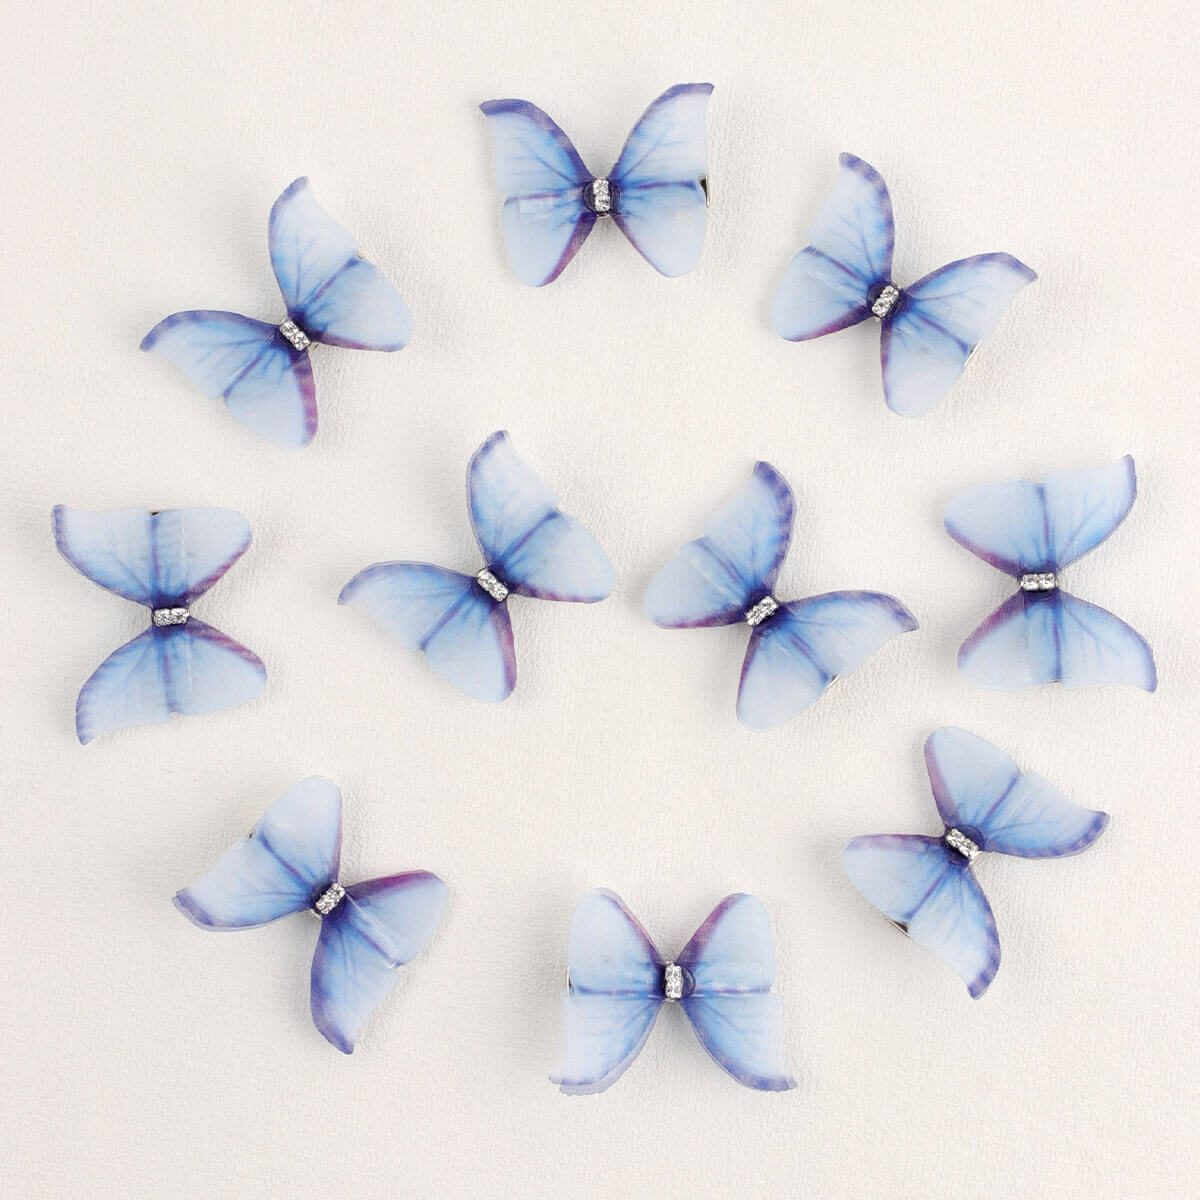 10PCS Lace Butterfly Girl Hair Clips